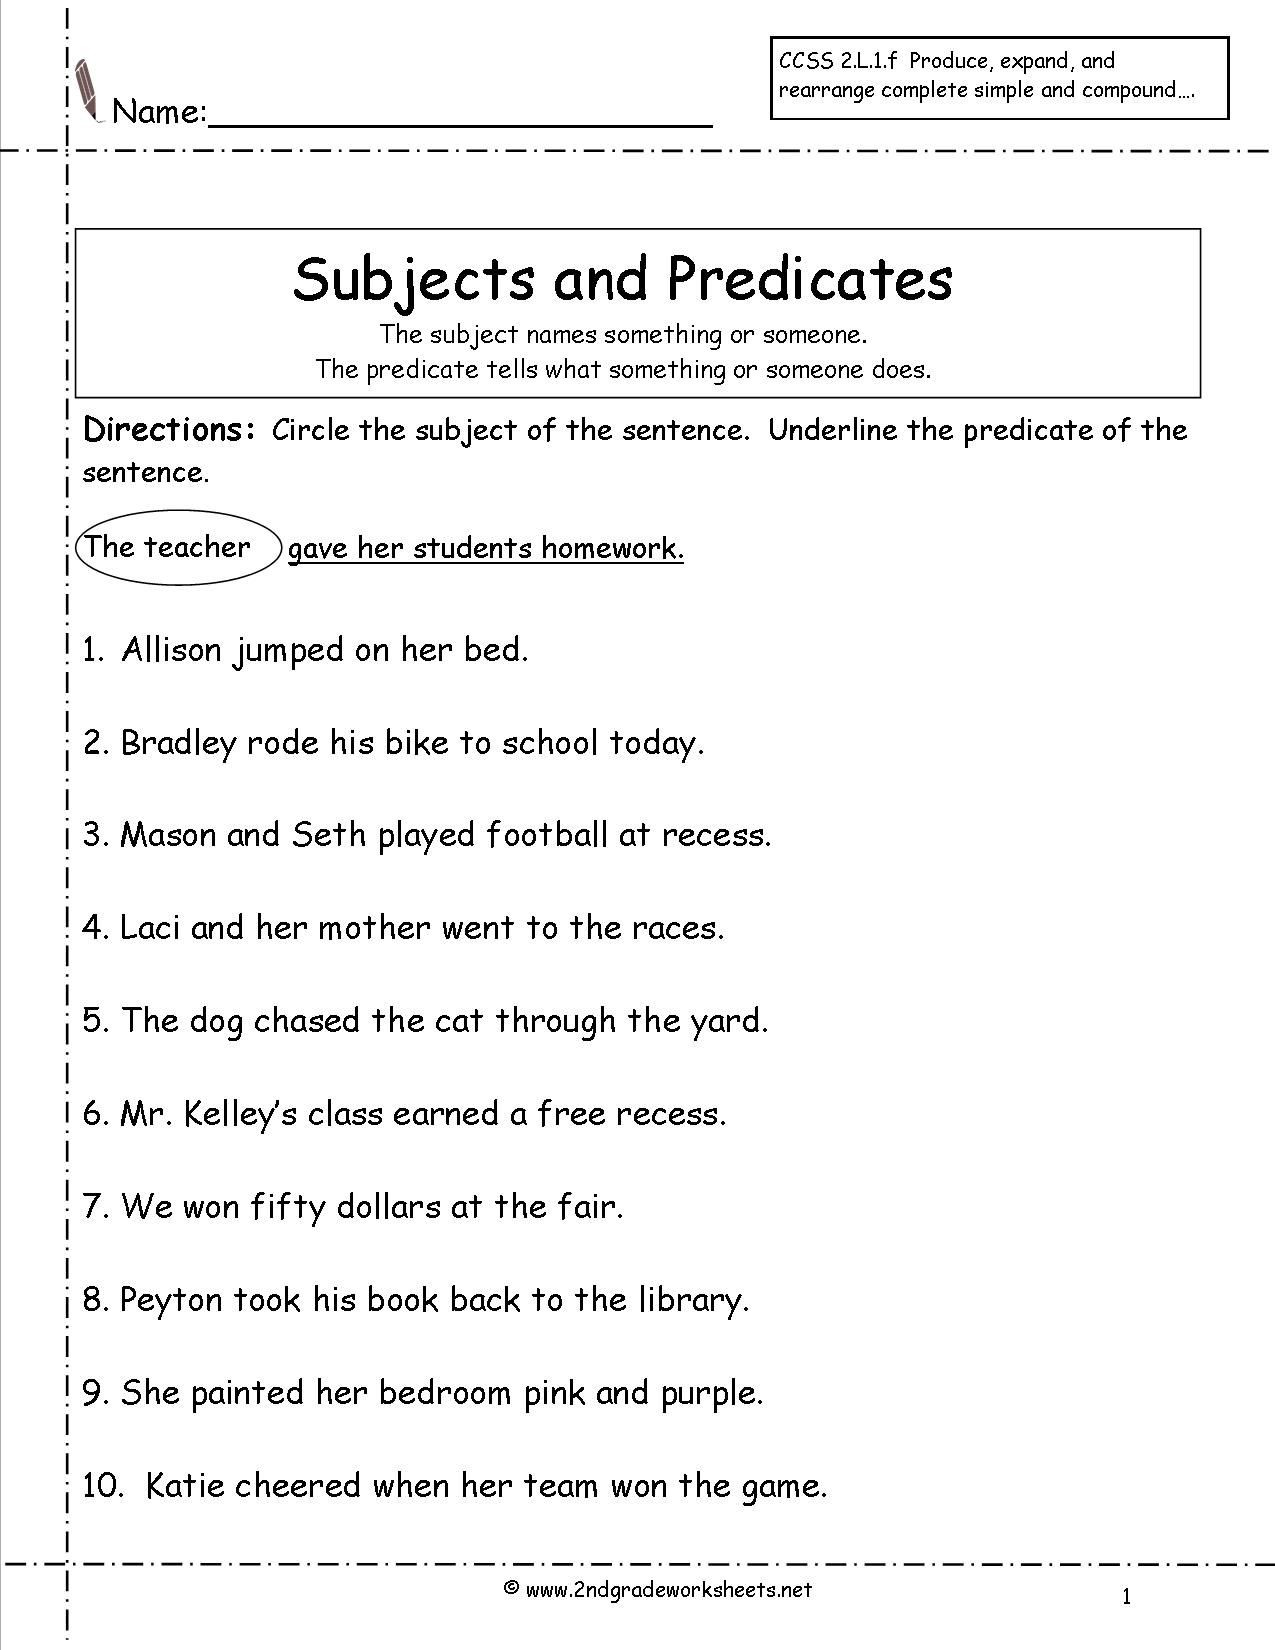 Subject and Predicate Worksheet Subject Predicate Worksheets 2nd Grade Google Search